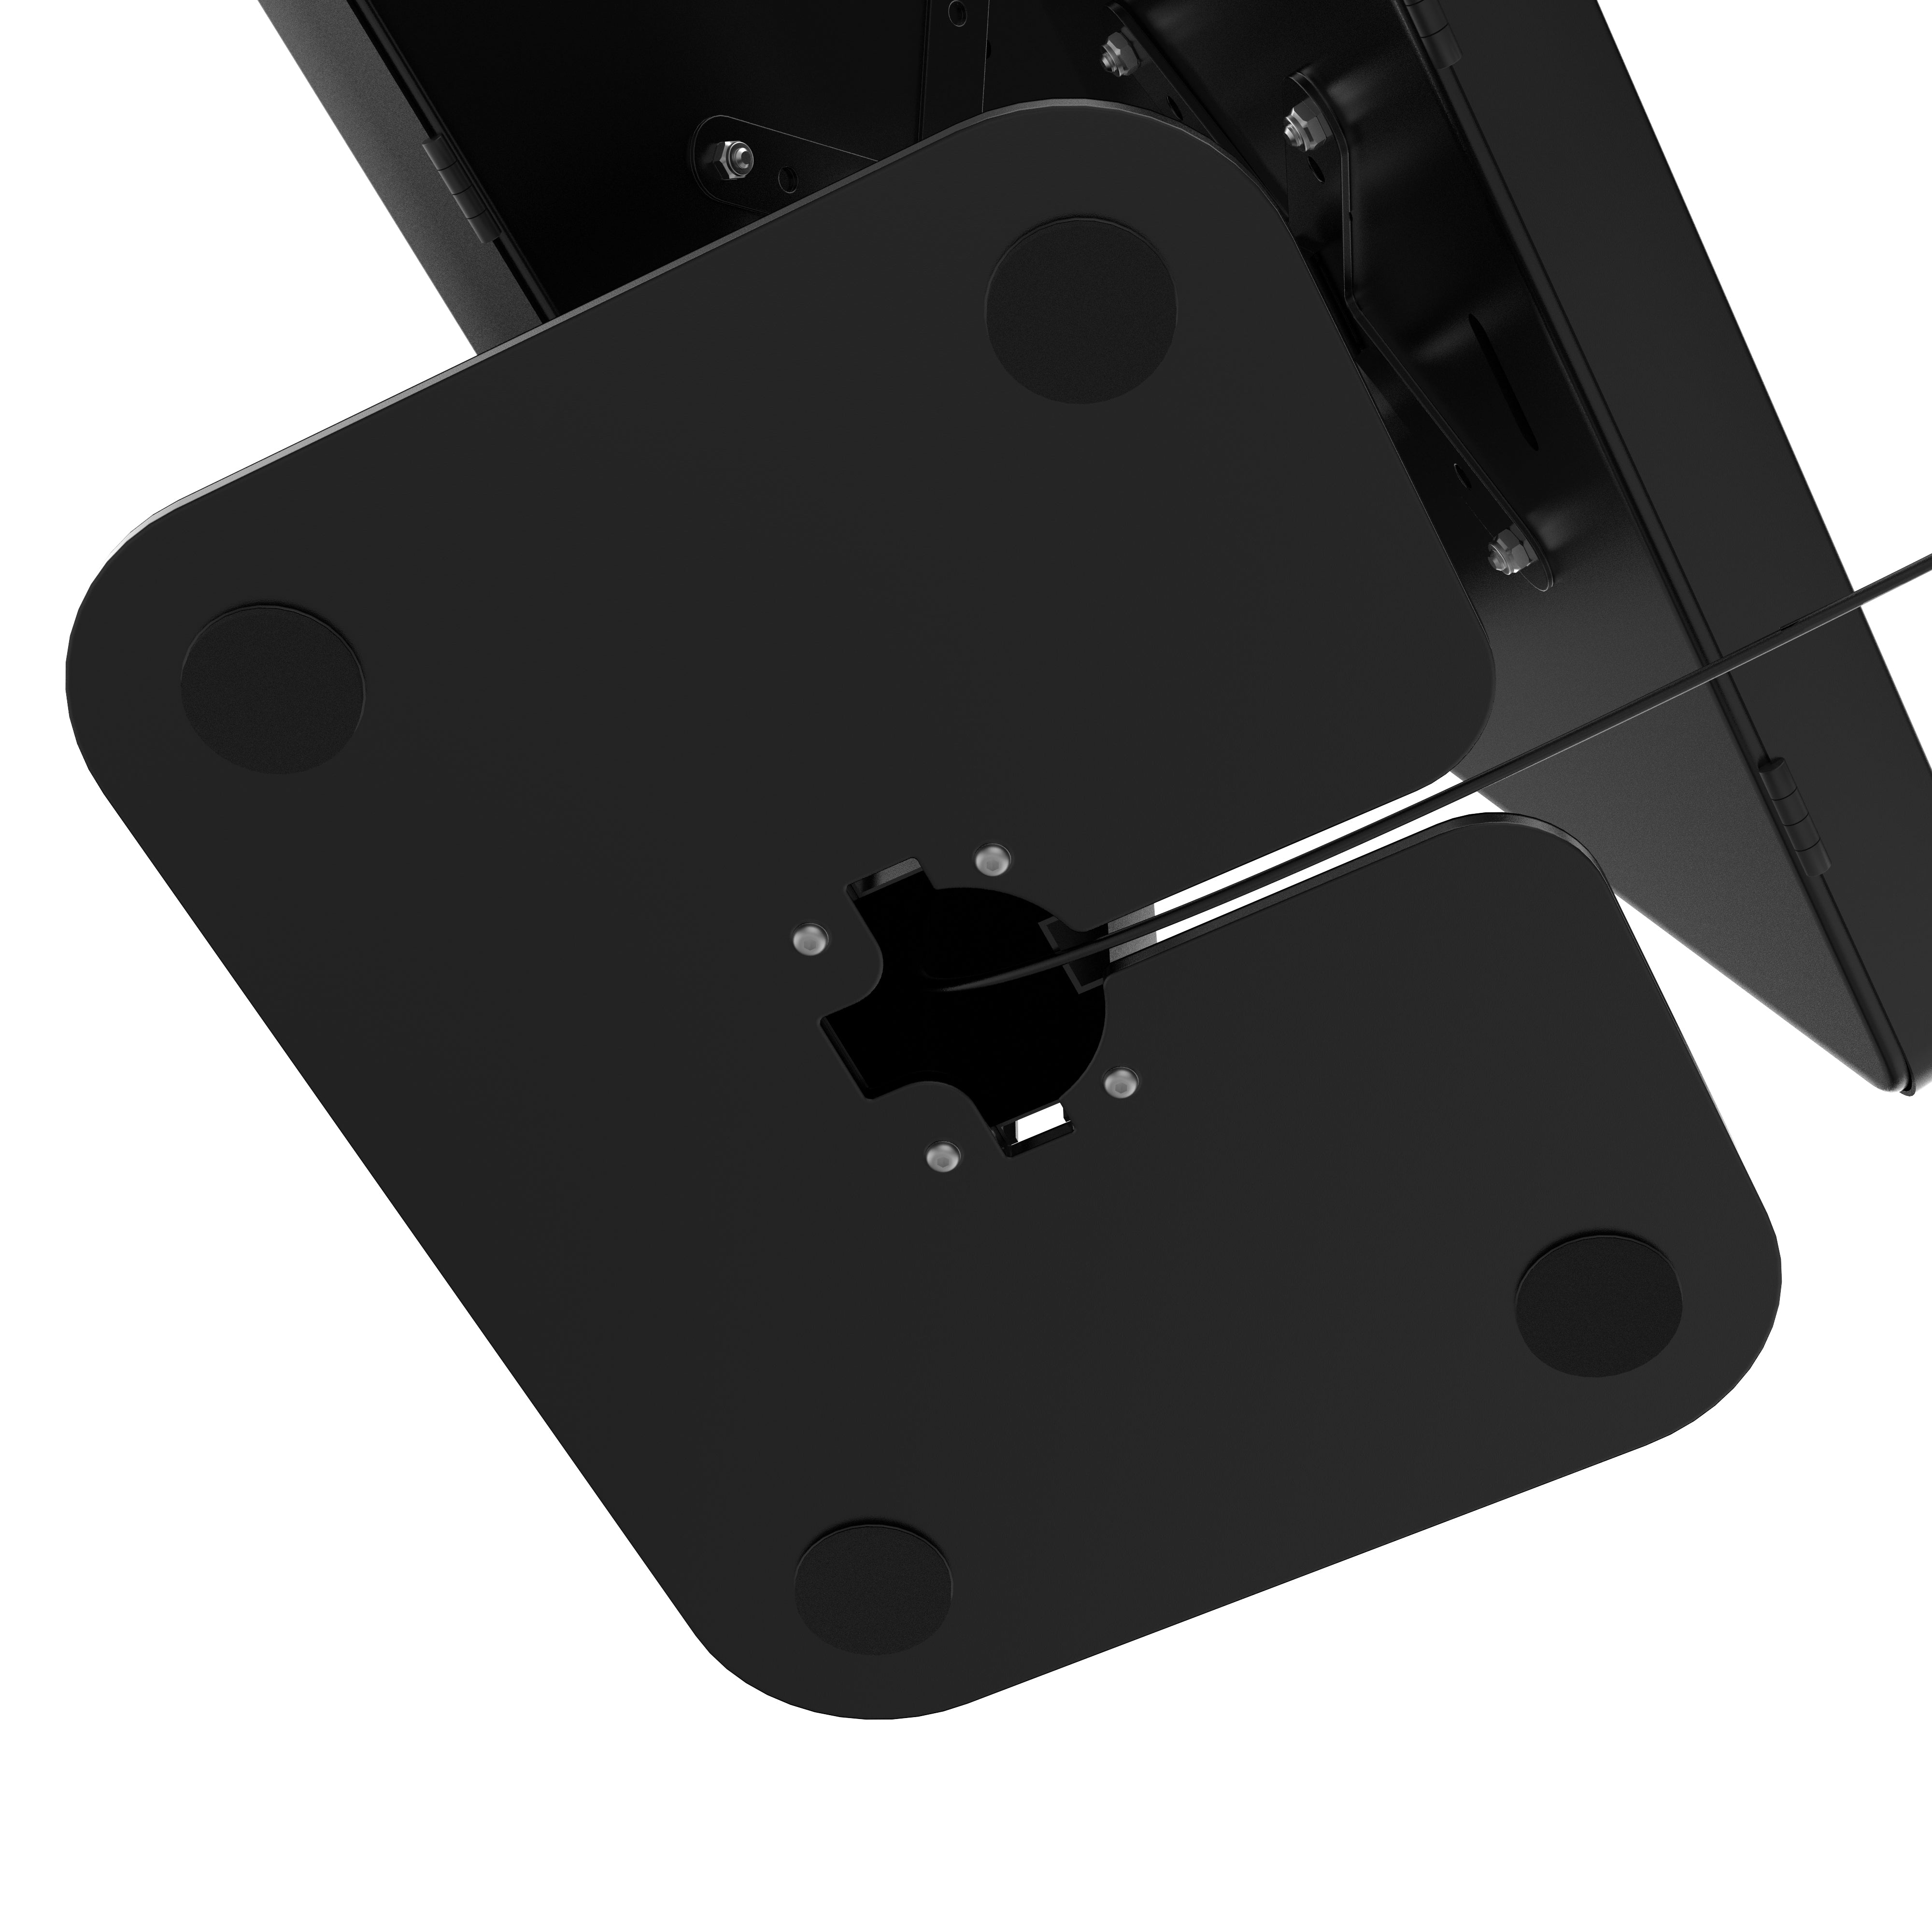 Adjustable Table Mount with 2 Universal Security Enclosures for 9.7 - 11 inches devices